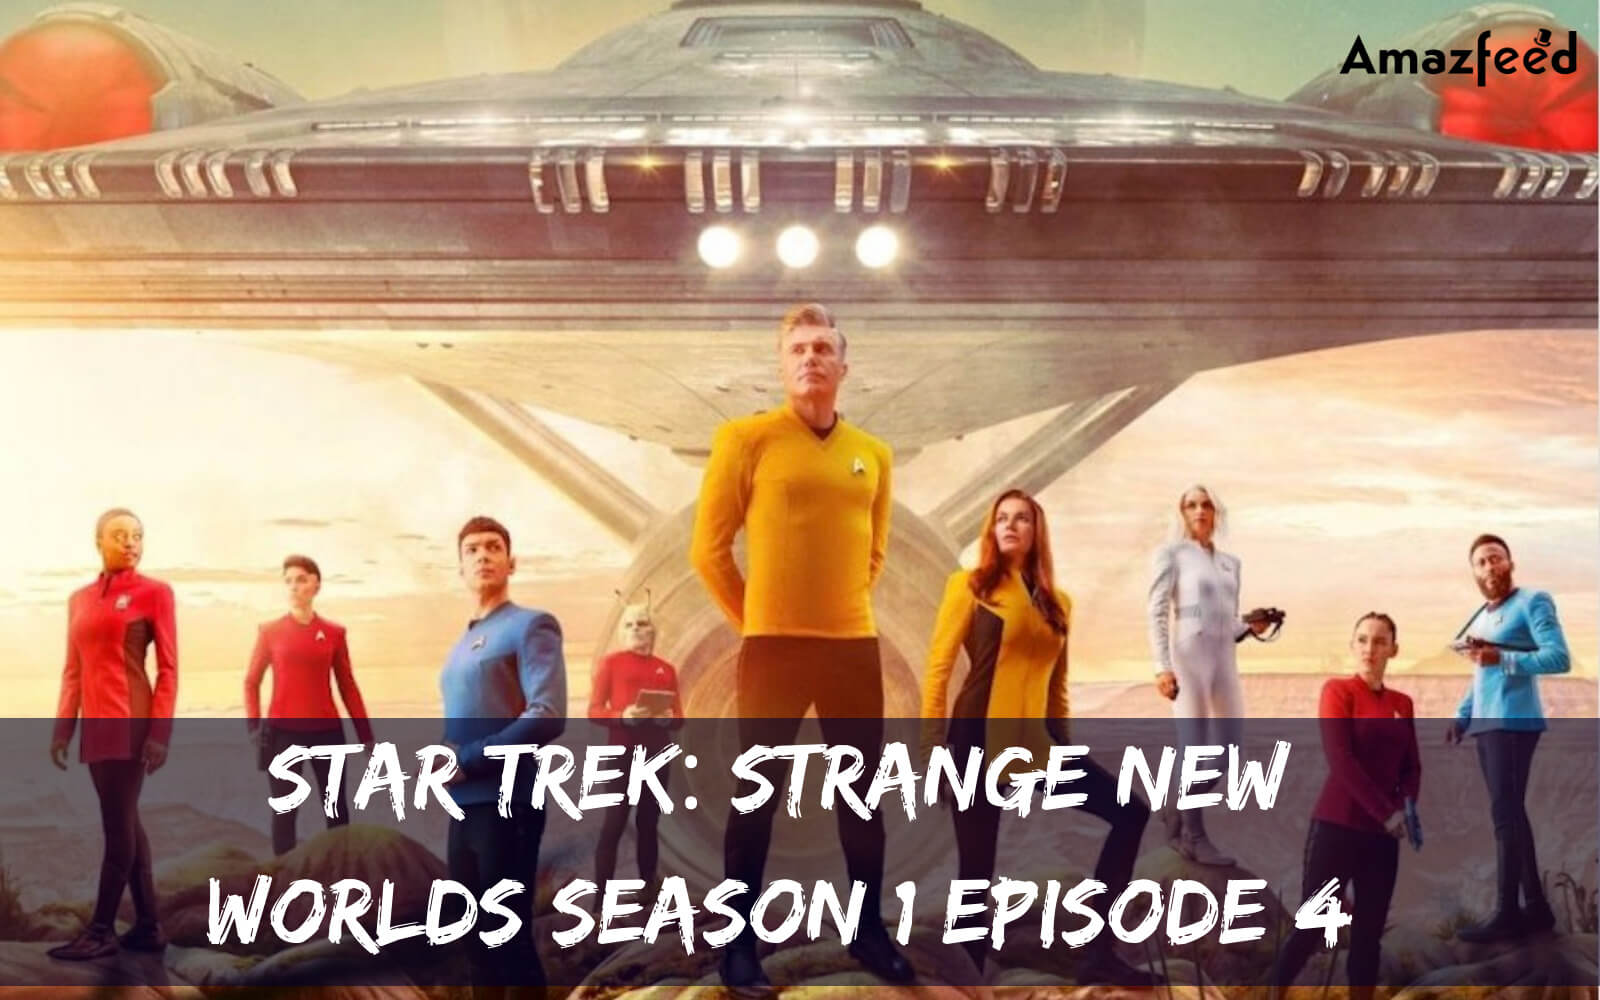 When Is Star Trek Strange New Worlds Season 1 Episode 4 Coming Out (Release Date)